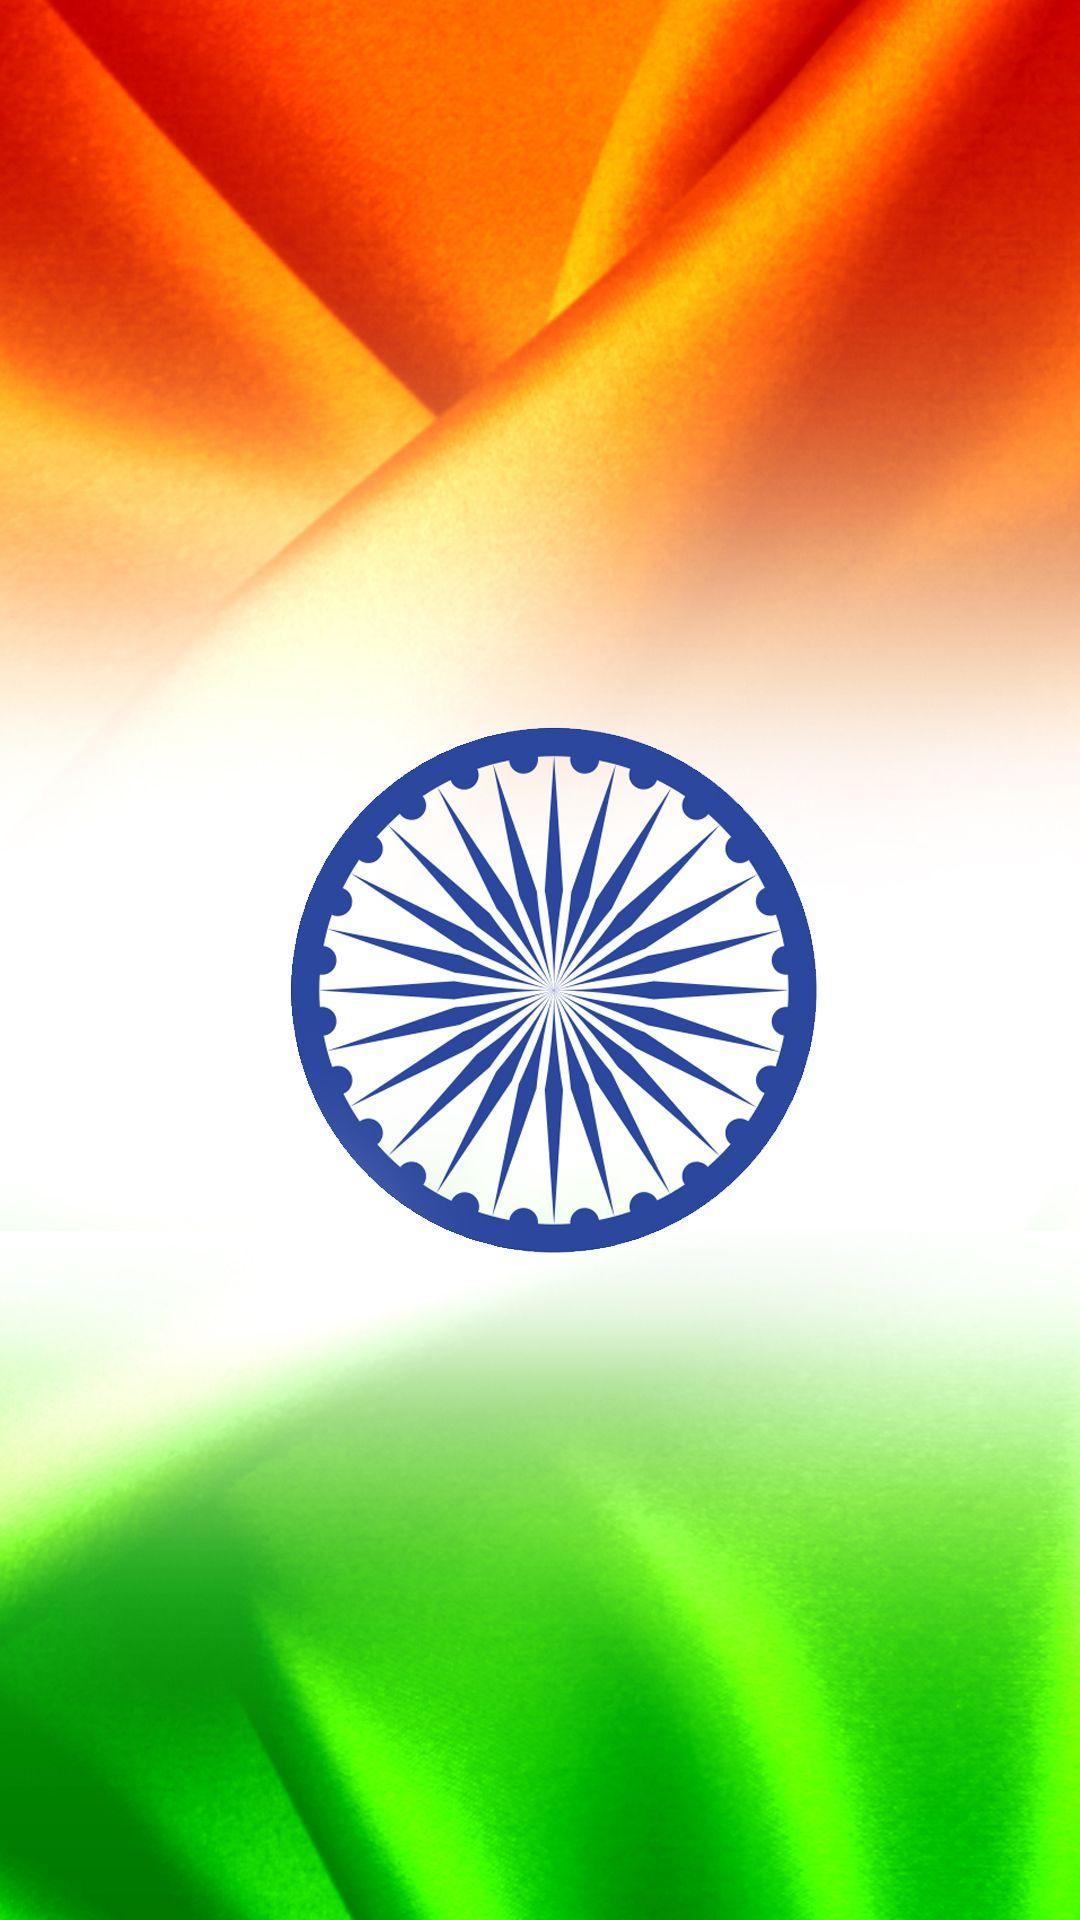 India Flag for Mobile Phone Wallpaper 11 of 17 India Flag Wallpaper. Wallpaper Download. High Resolution Wallpaper. Indian flag wallpaper, Indian flag, Indian flag image